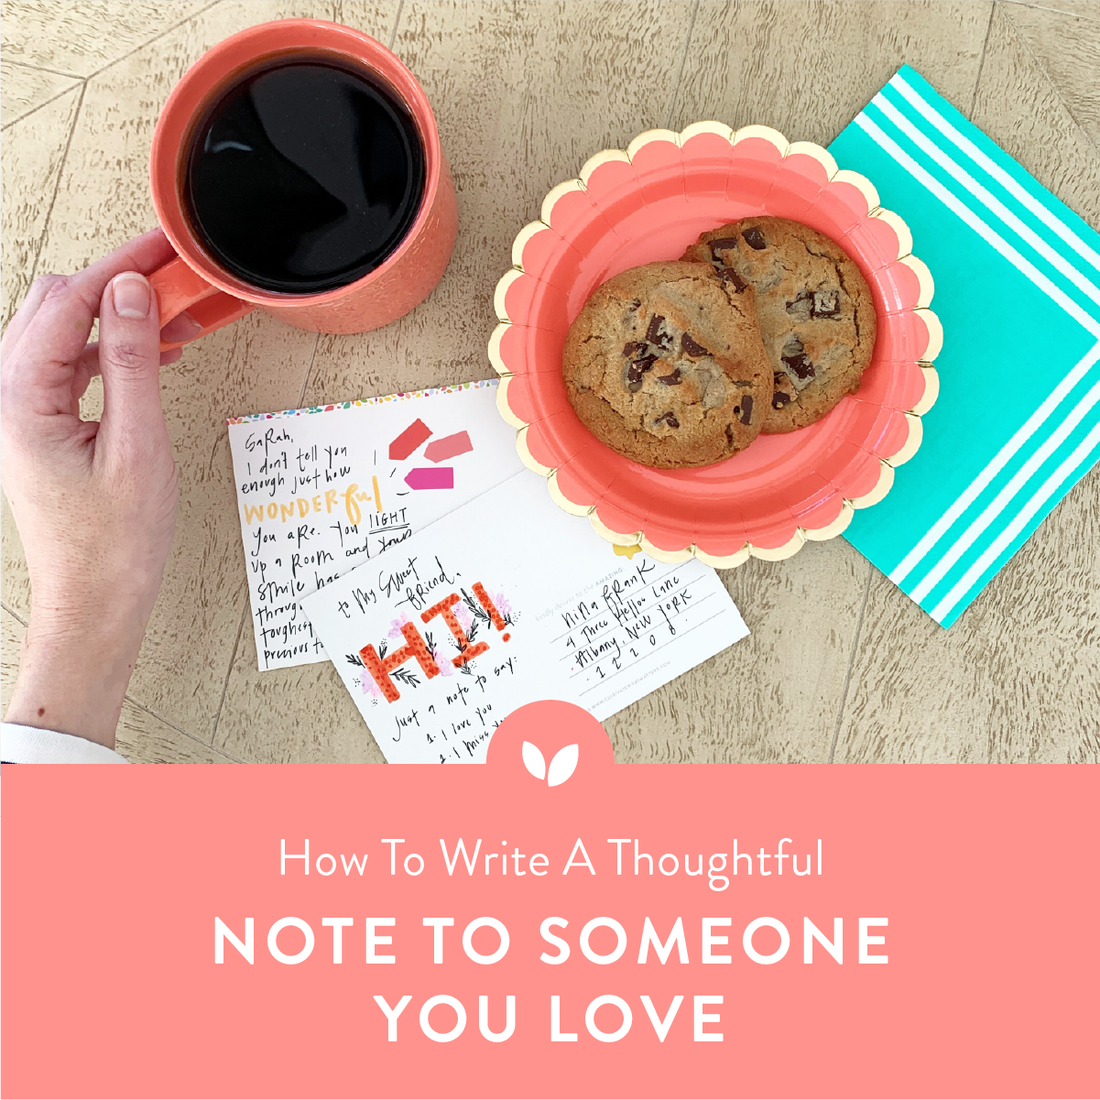 How to Write a Thoughtful Note to Someone You Love